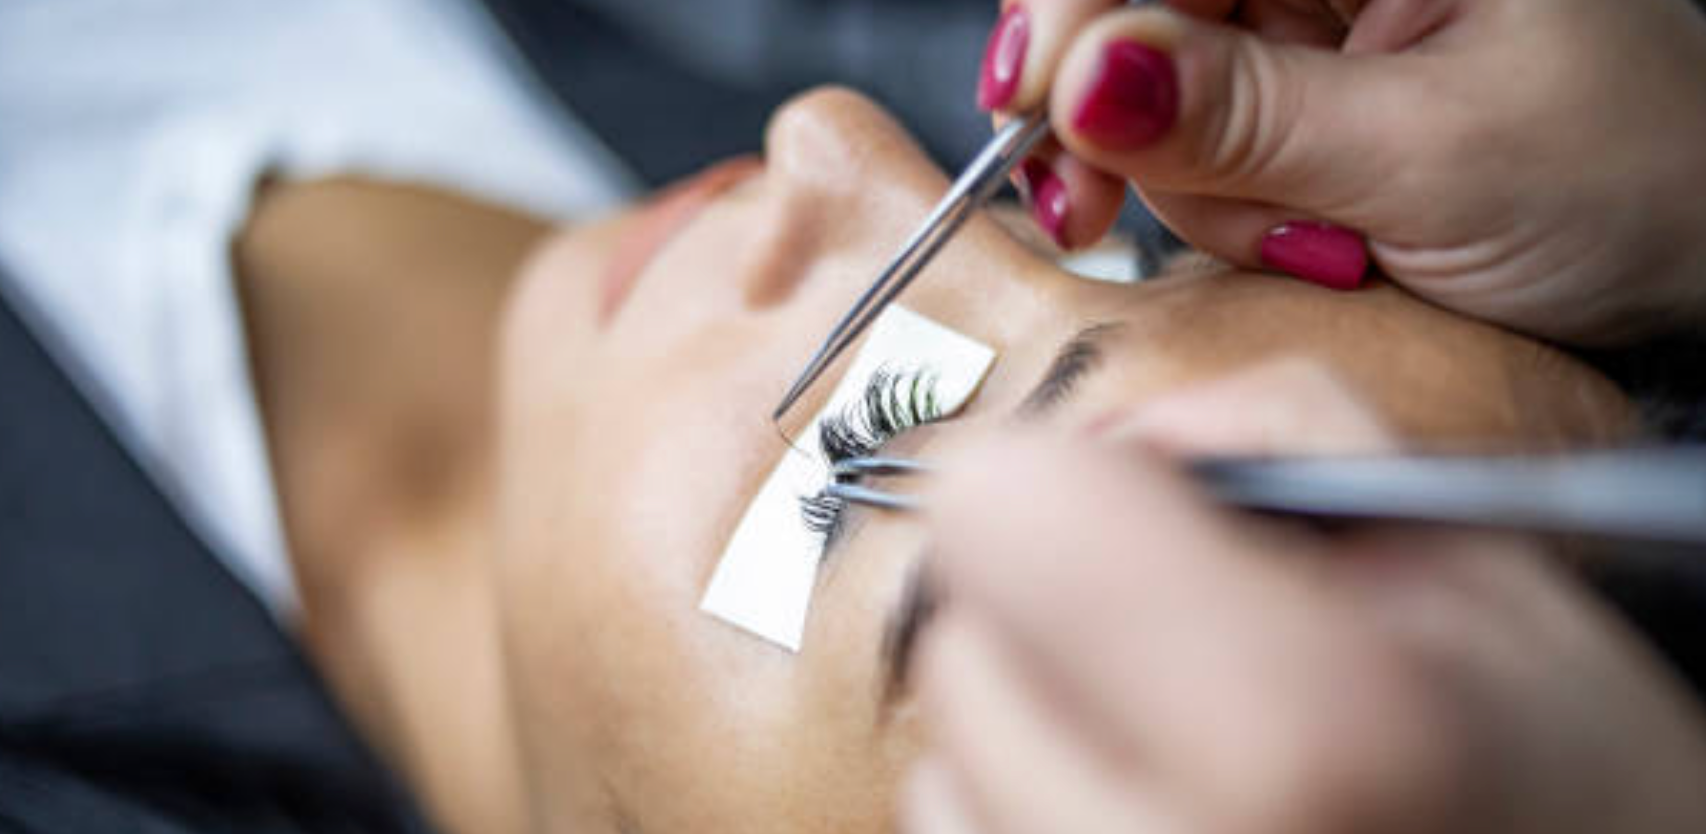 Let’s Talk About Shed, Baby- Booking Your Lash Refill Appointment is Essential!